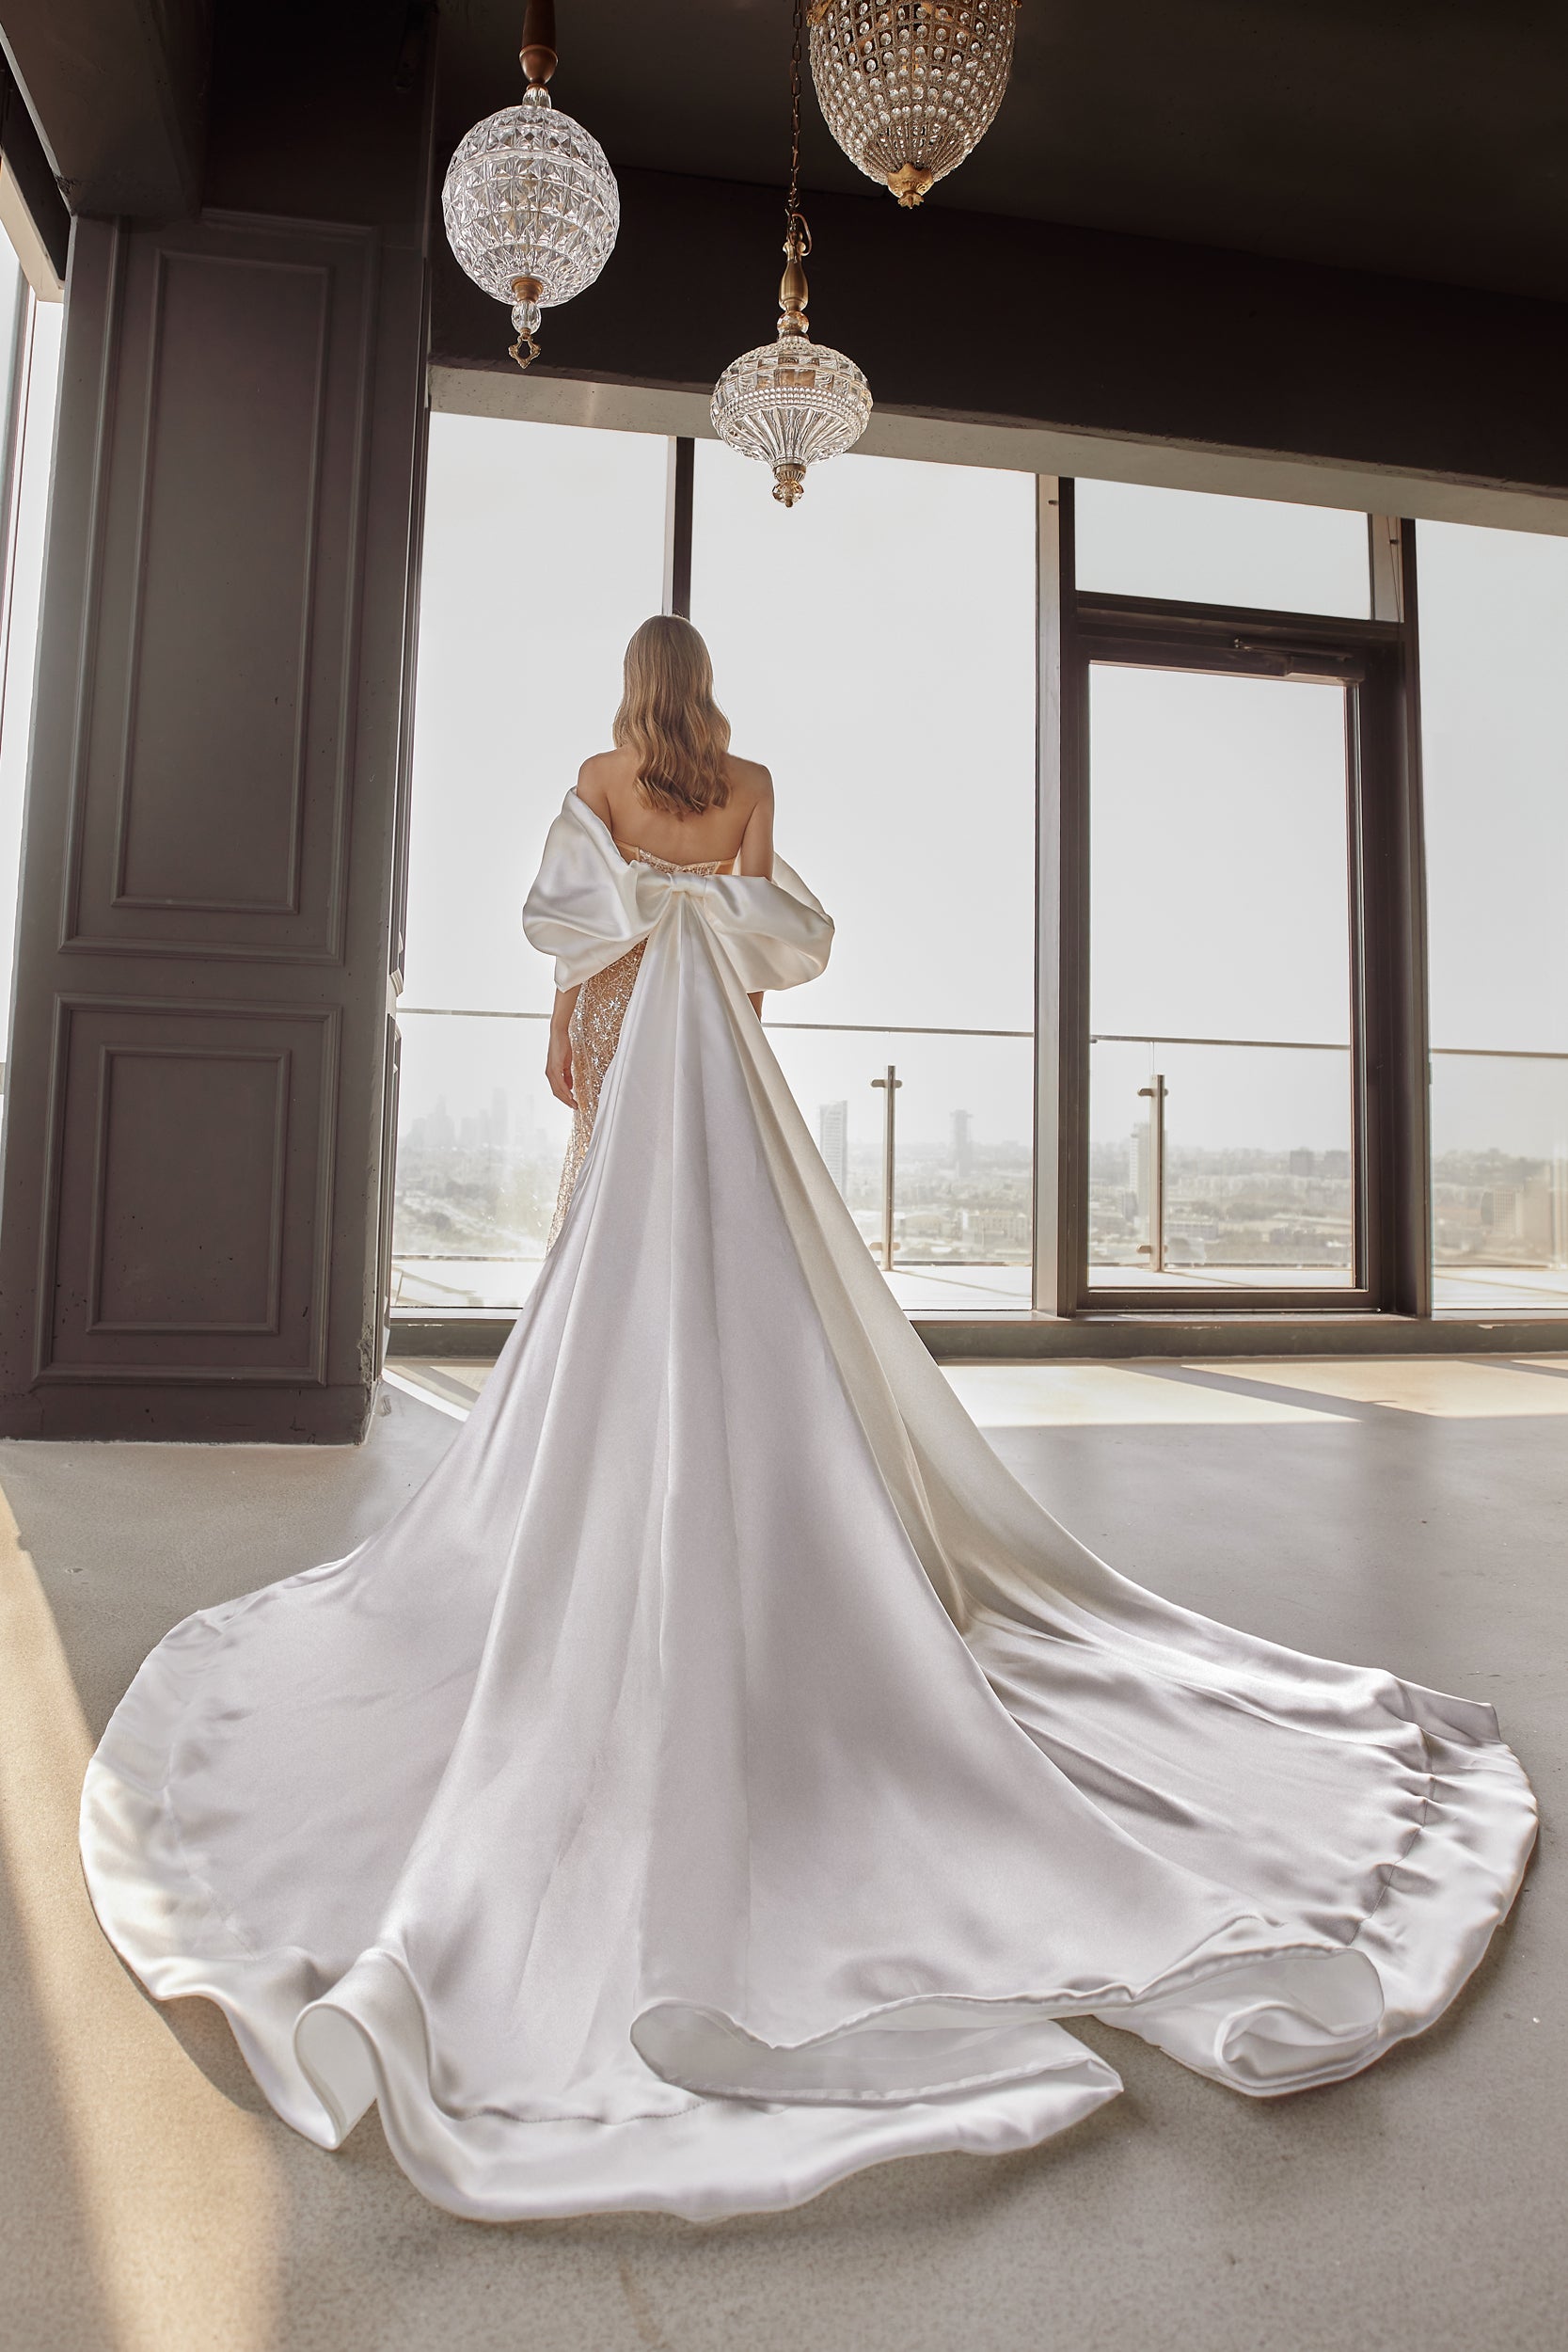 Dramatic Satin Bow Cape by Tal Kedem Bridal Couture - Image 2